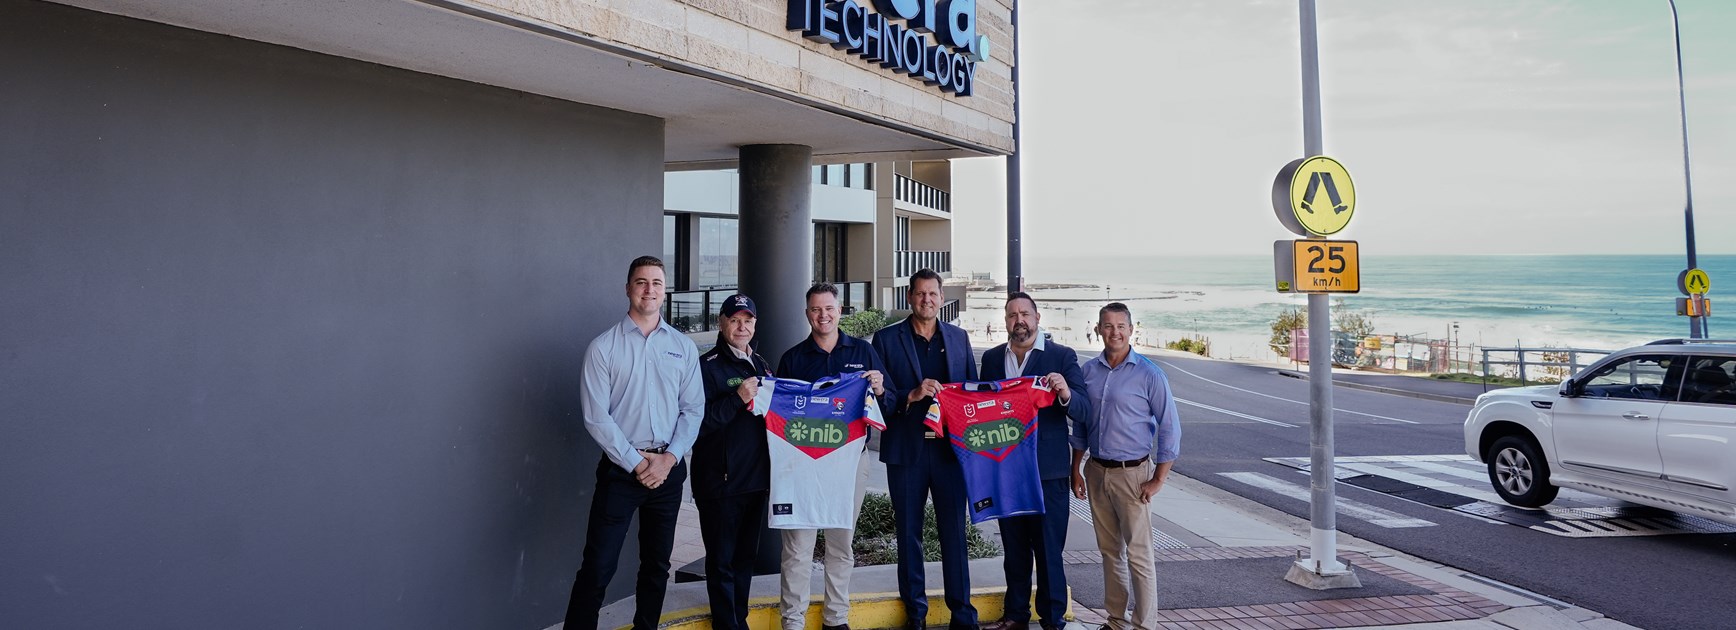 New Era Technology becomes official sponsor of the Knights